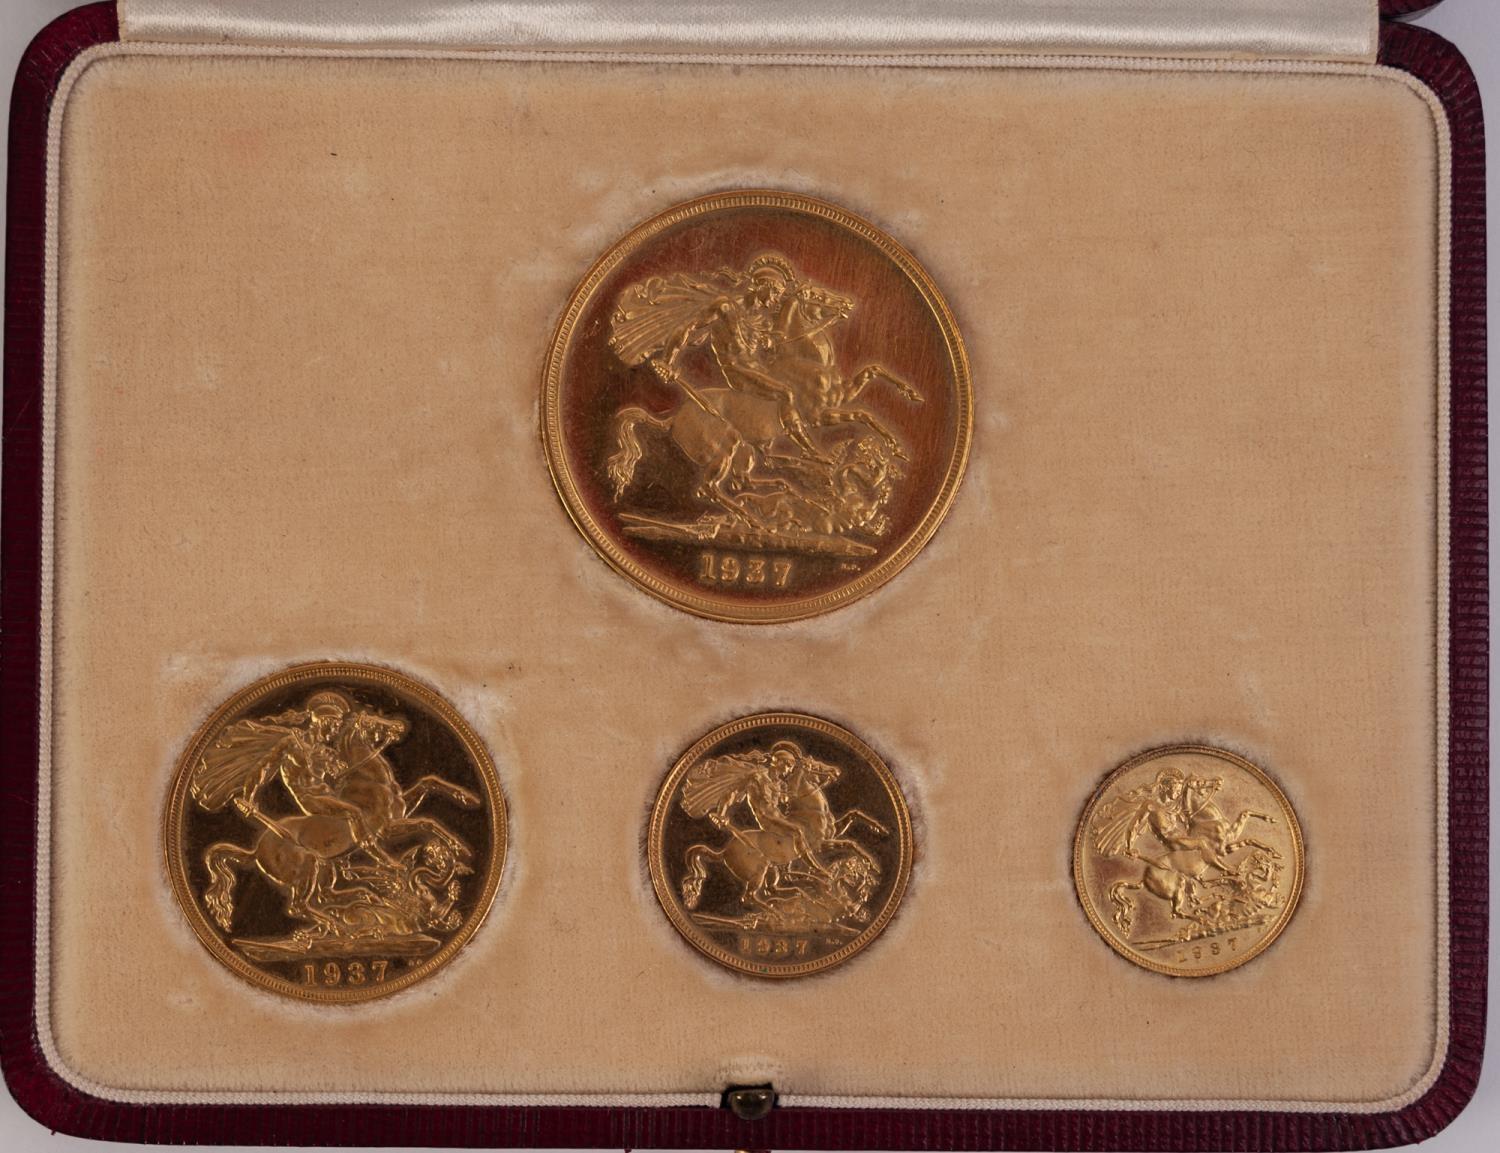 GEORGE VI 1937 SET OF FOUR GOLD COINS, viz £5, £2, sovereign and half sovereign, in case, - Image 5 of 6